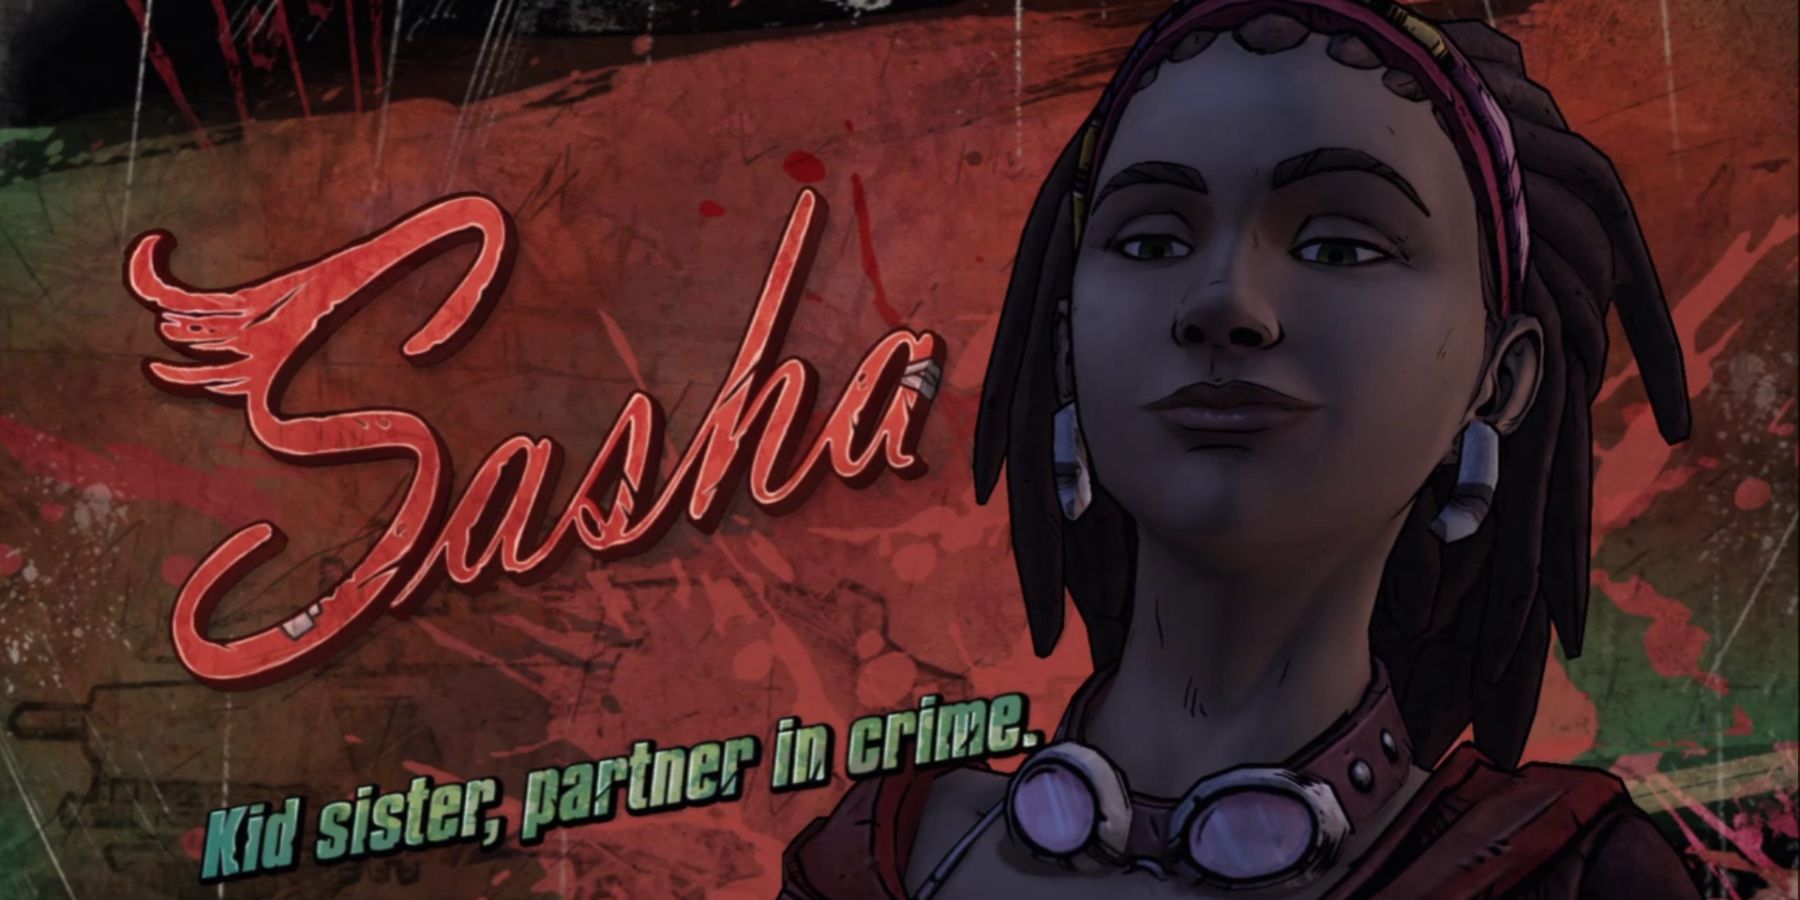 a young woman with an olive complexion, brown dreadlocks, goggles around her neck, and earrings made from claws. text reads: Sasha: kid sister, partner in crime 